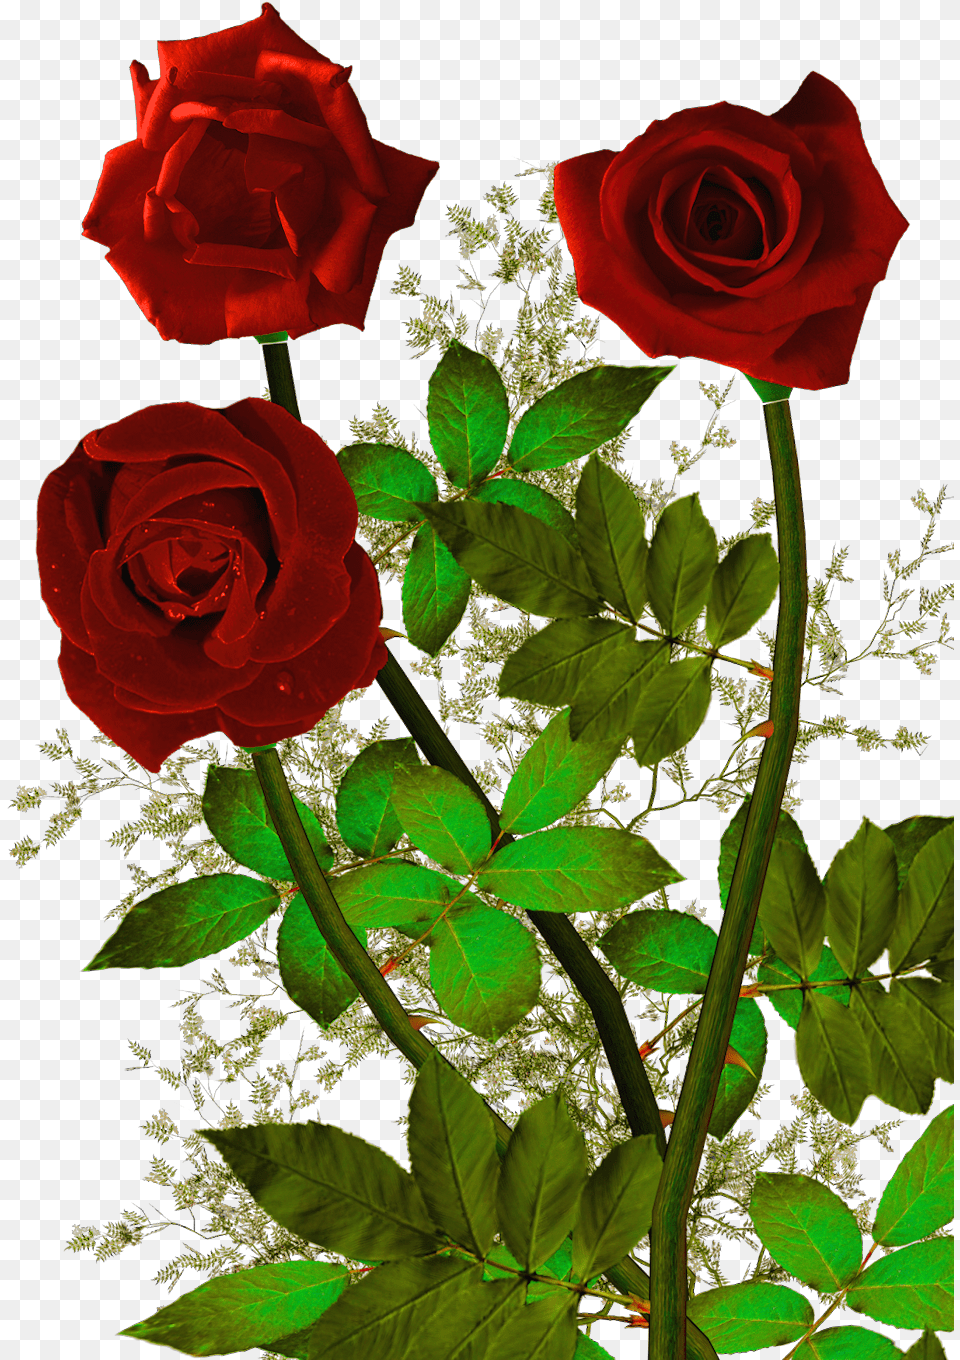 Download Hd Rosas Rojas White Wolf Red Roses, Flower, Plant, Rose, Flower Arrangement Png Image